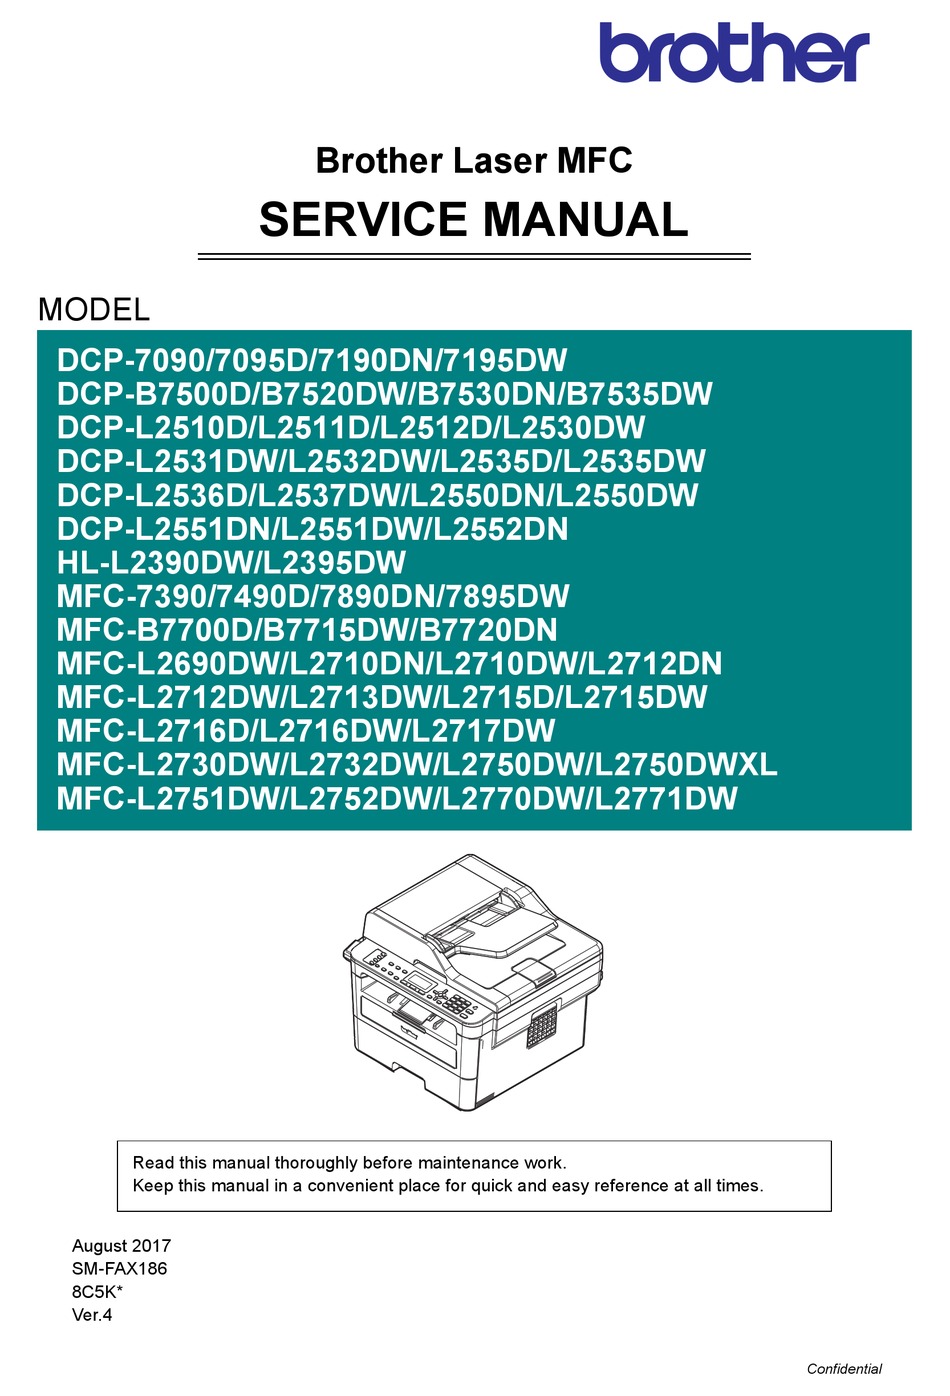 Dcp-l2550dw Manual Stop 2 Sided Printing On